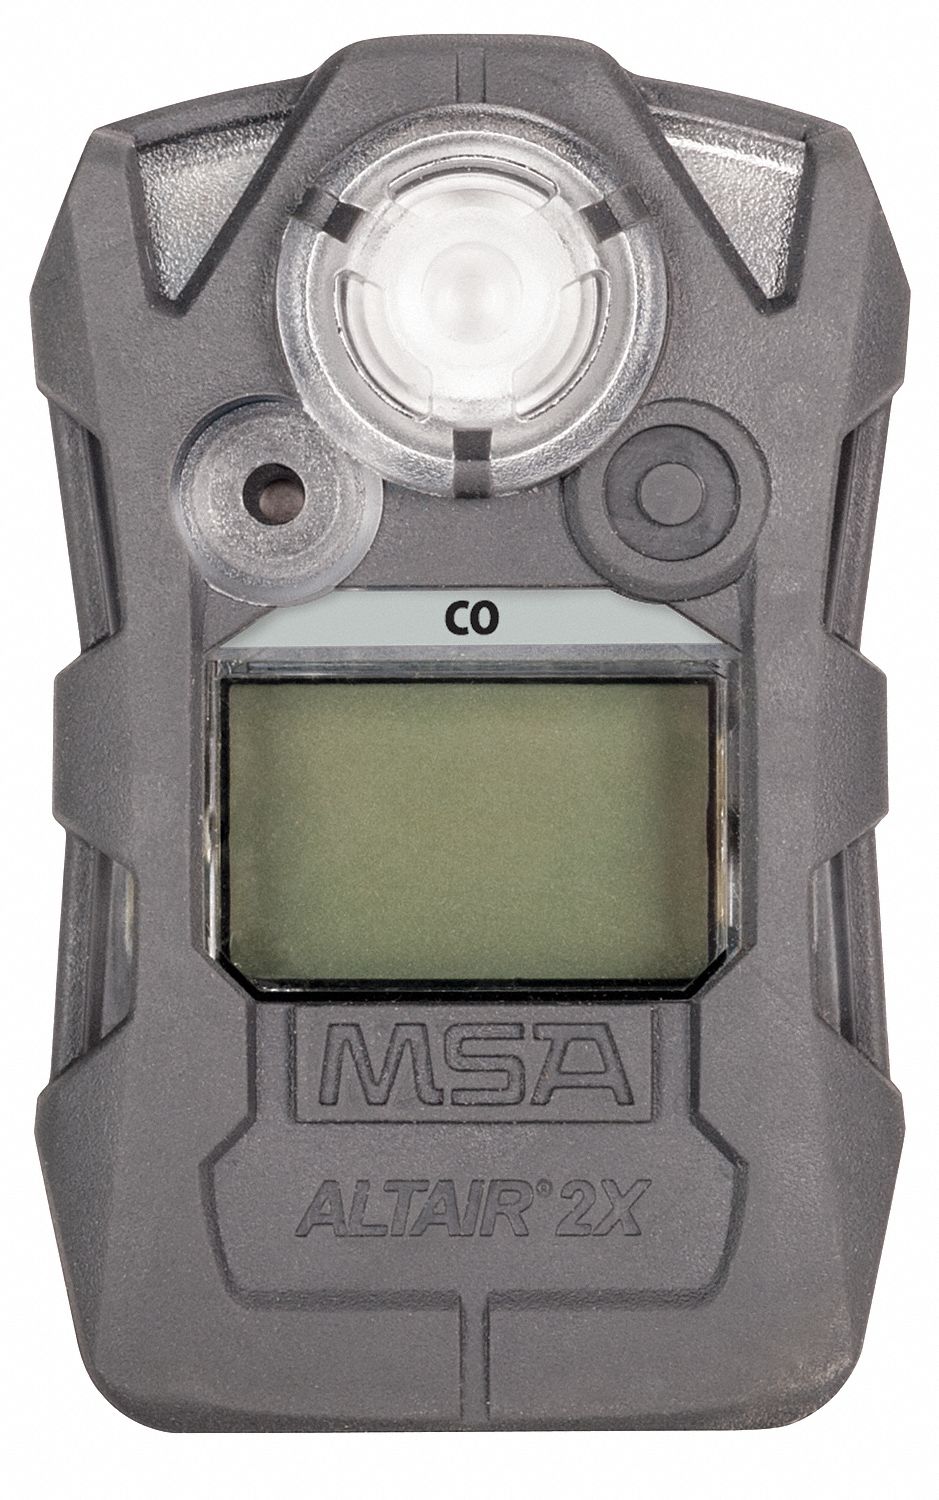 33RJ35 - Gas Detector Gray CO 0 to 9999 ppm